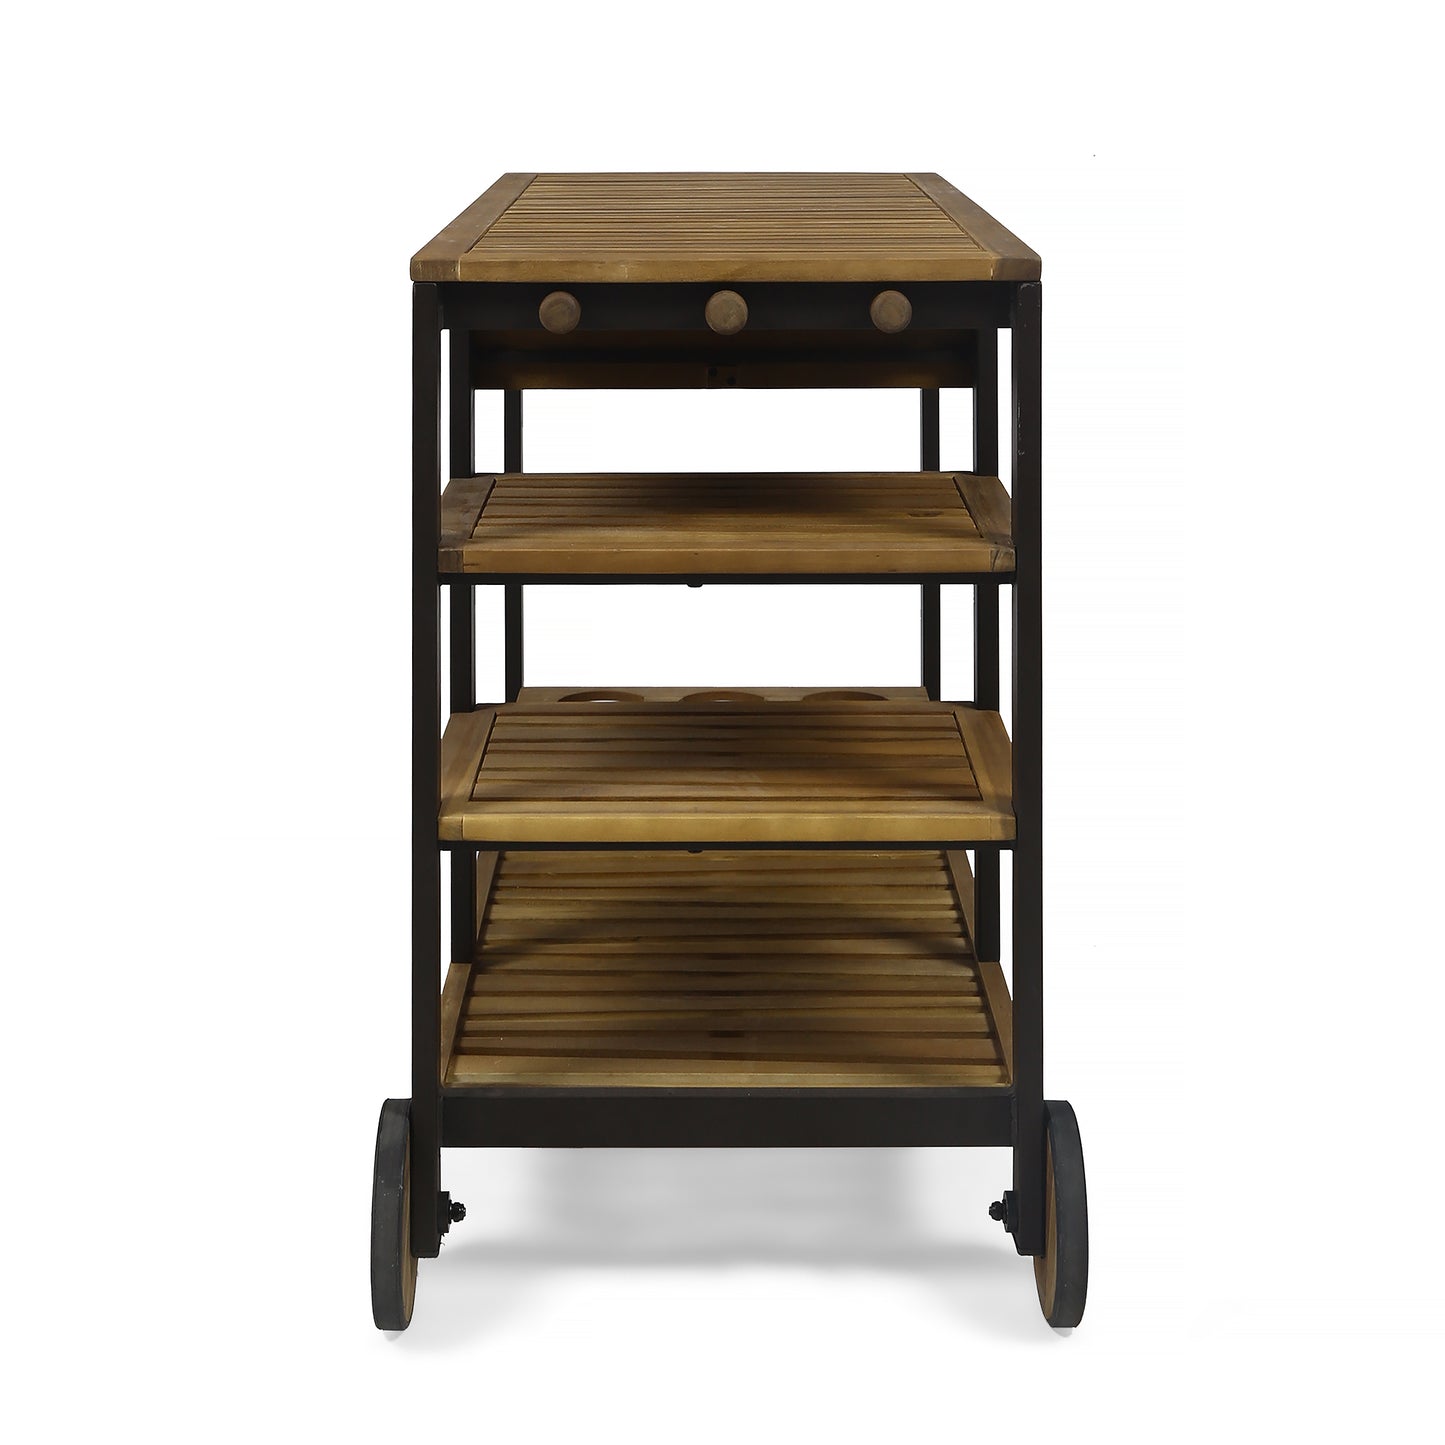 Ishtar Indoor Wood and Iron Bar Cart with Drawers and Wine Bottle Holders